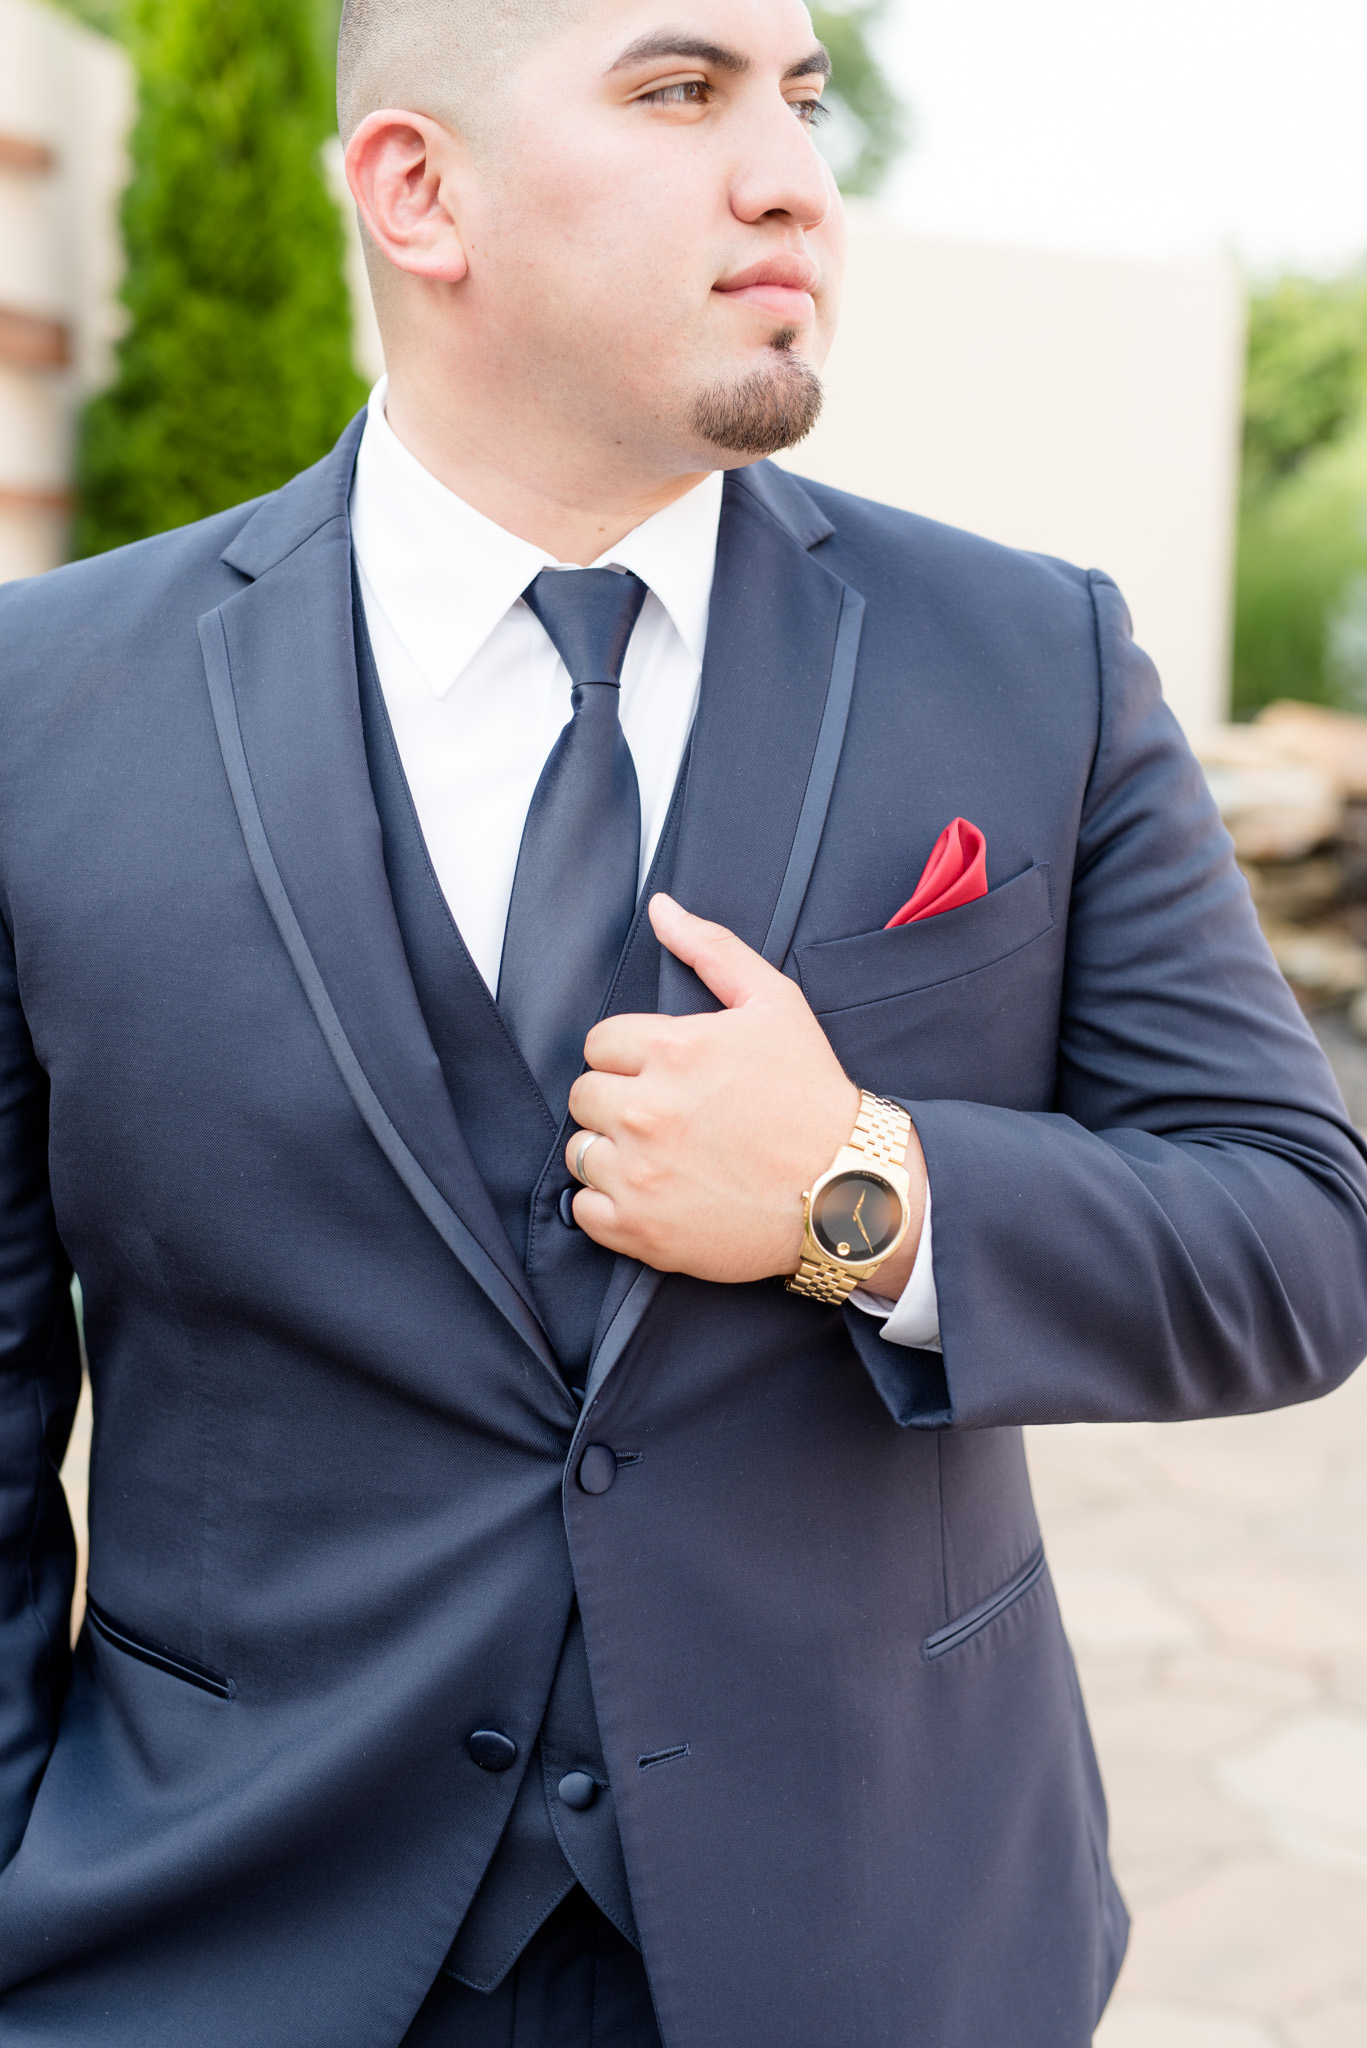 Groom shows off new watch.